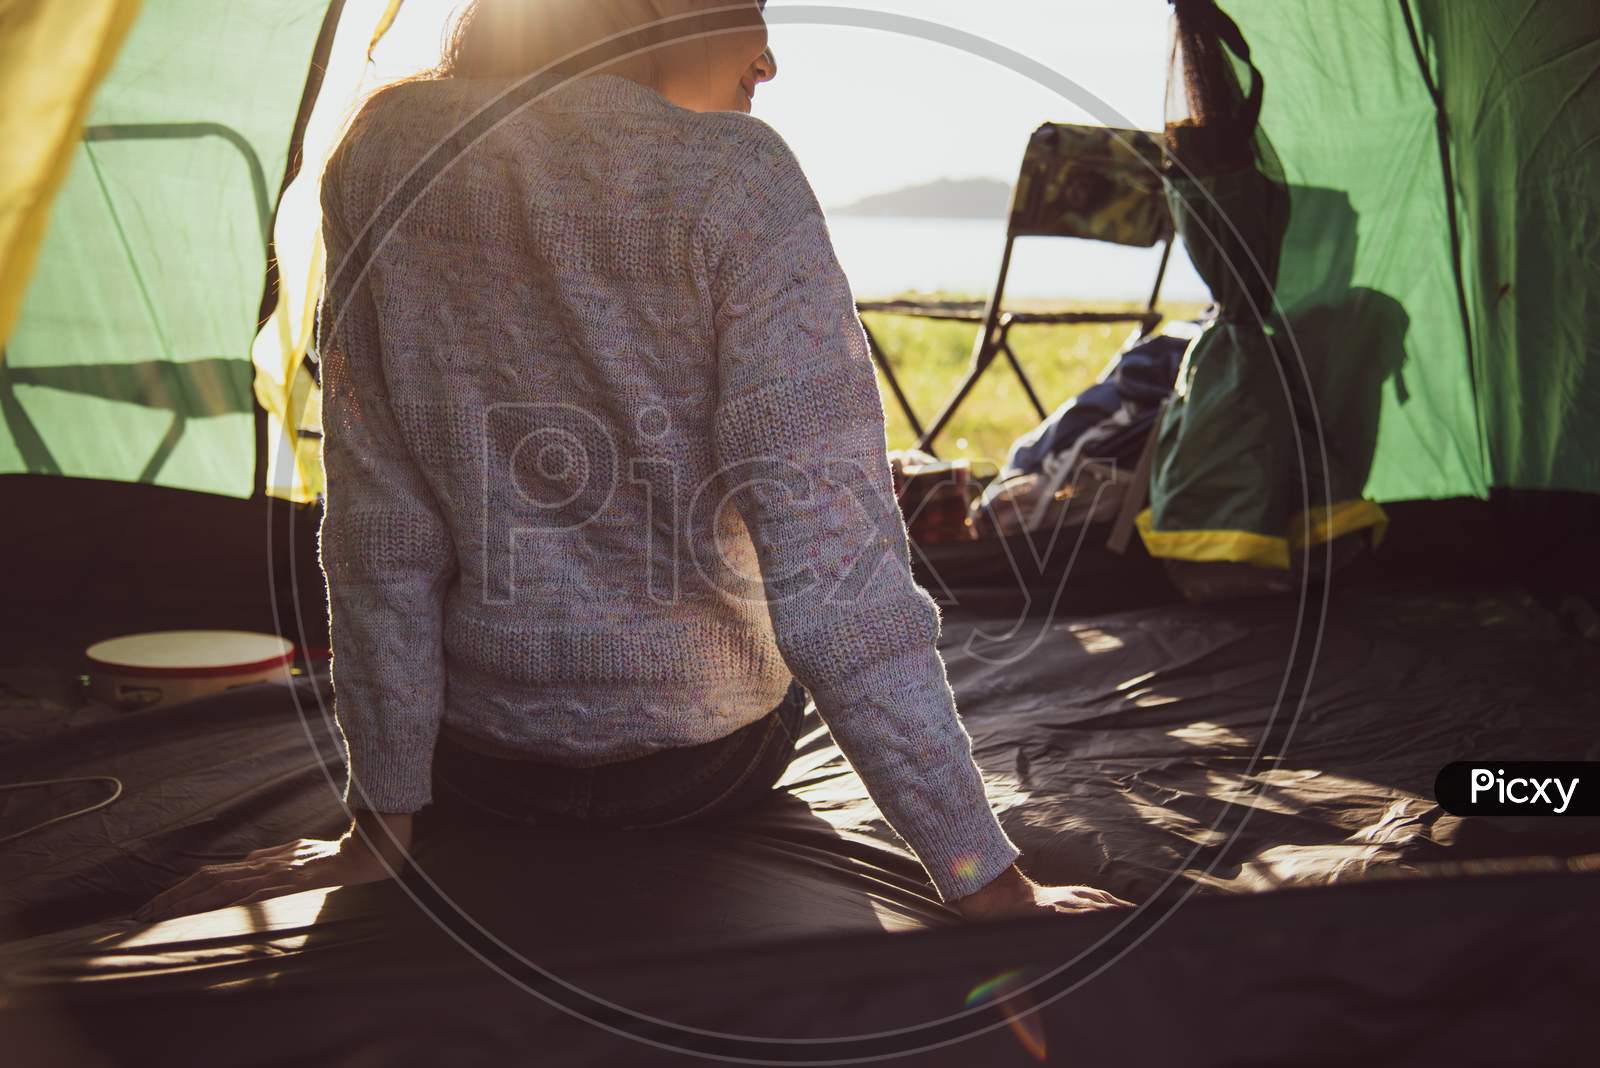 Back View Of Happy Female Tourist Relaxing In Camping Tent With Mountain And Sun Flare Background. People And Lifestyles Concept. Travel And Vacation In Outdoors Meadow. Tourism And Hiking Theme.